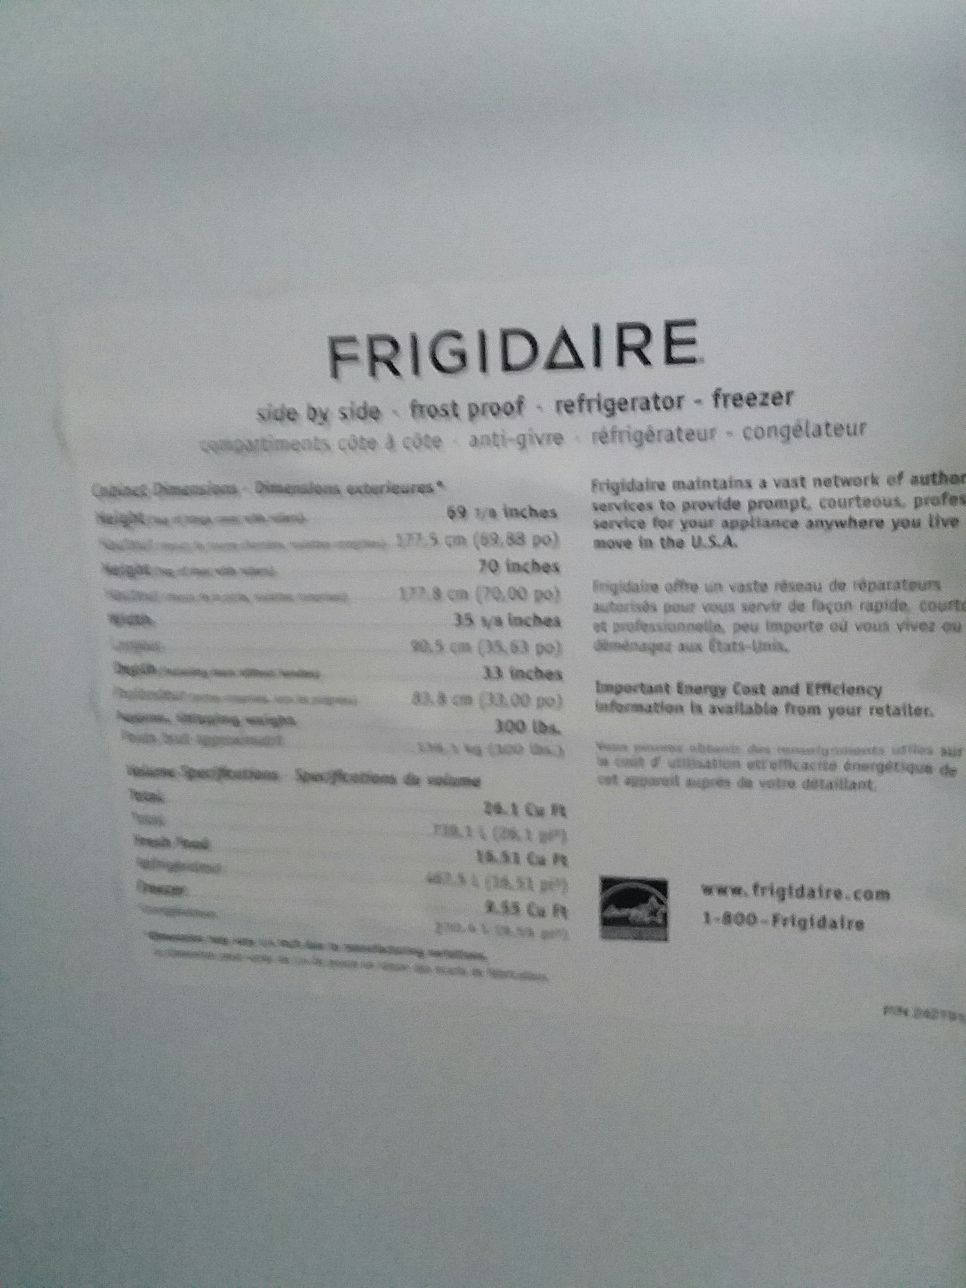 Frigidaire side by side freezer fridgerater ice and water maker